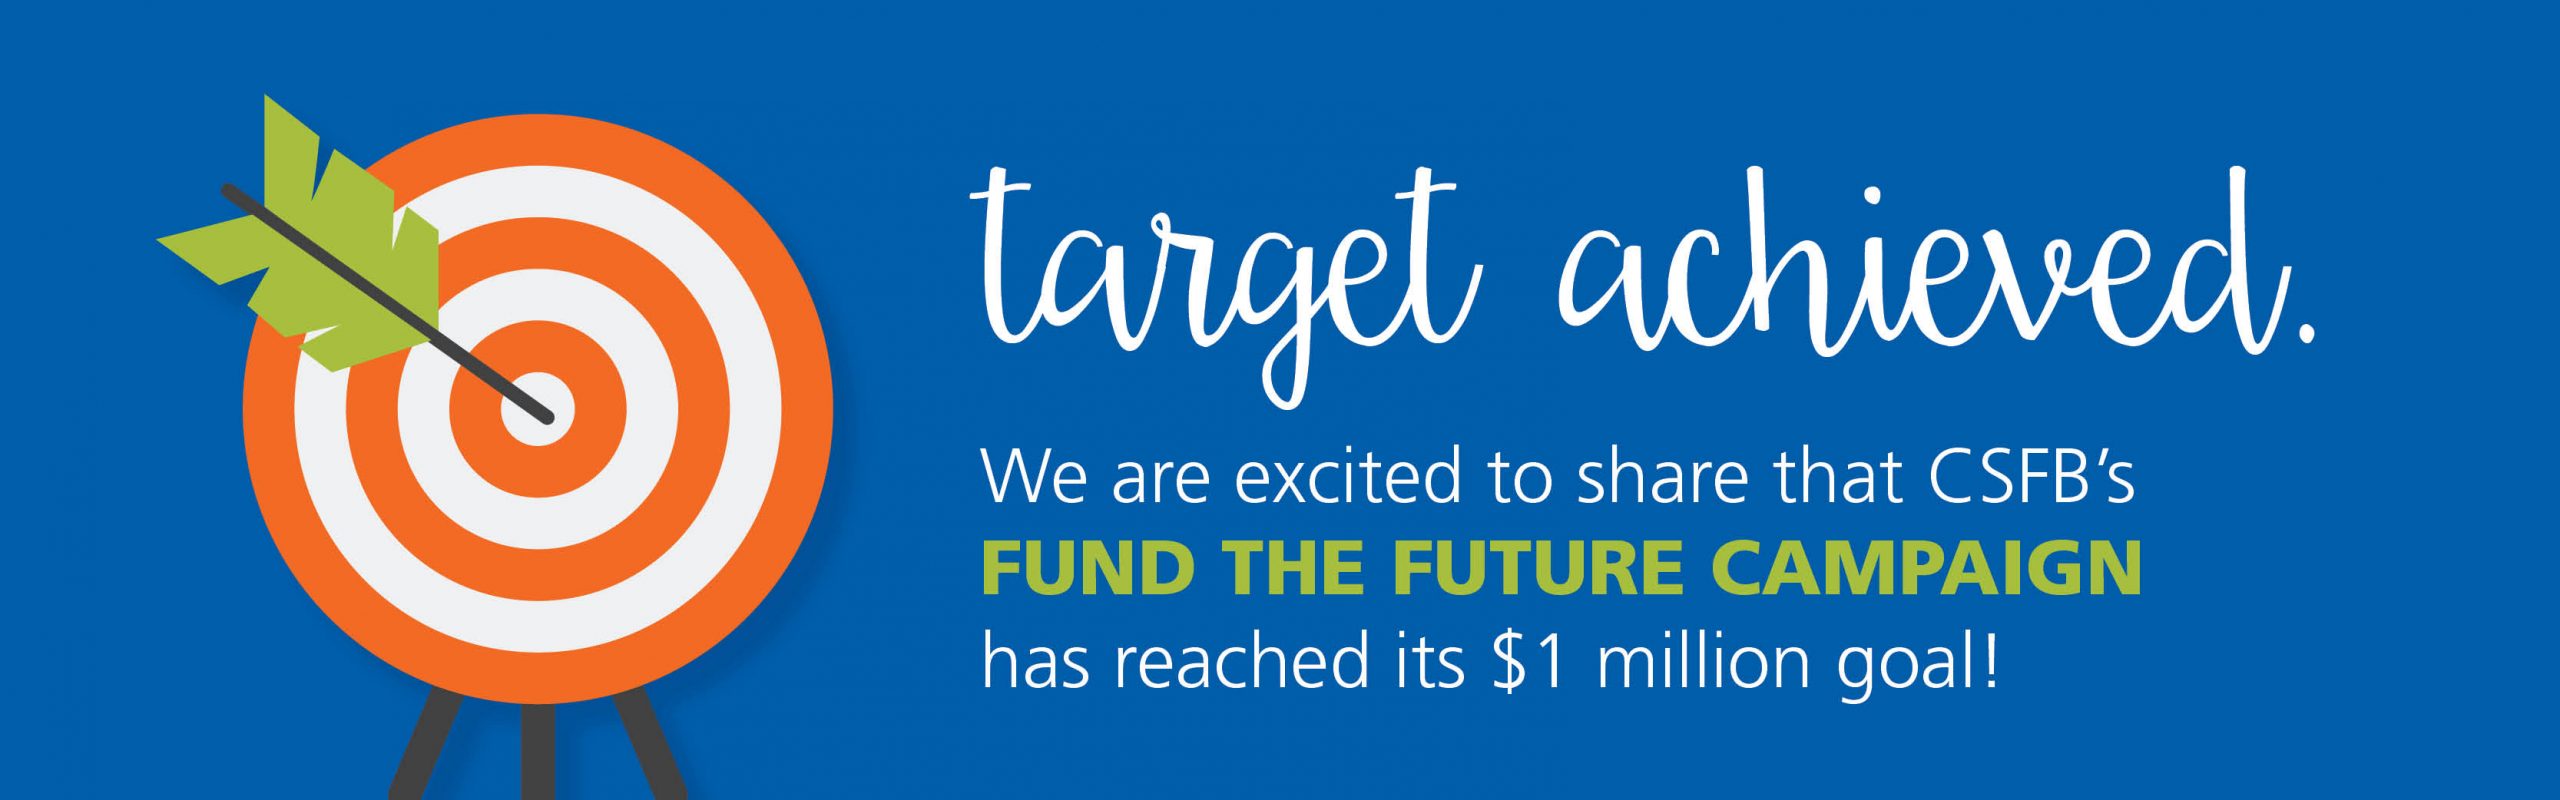 $1 million Target achieved Fund the Future campaign